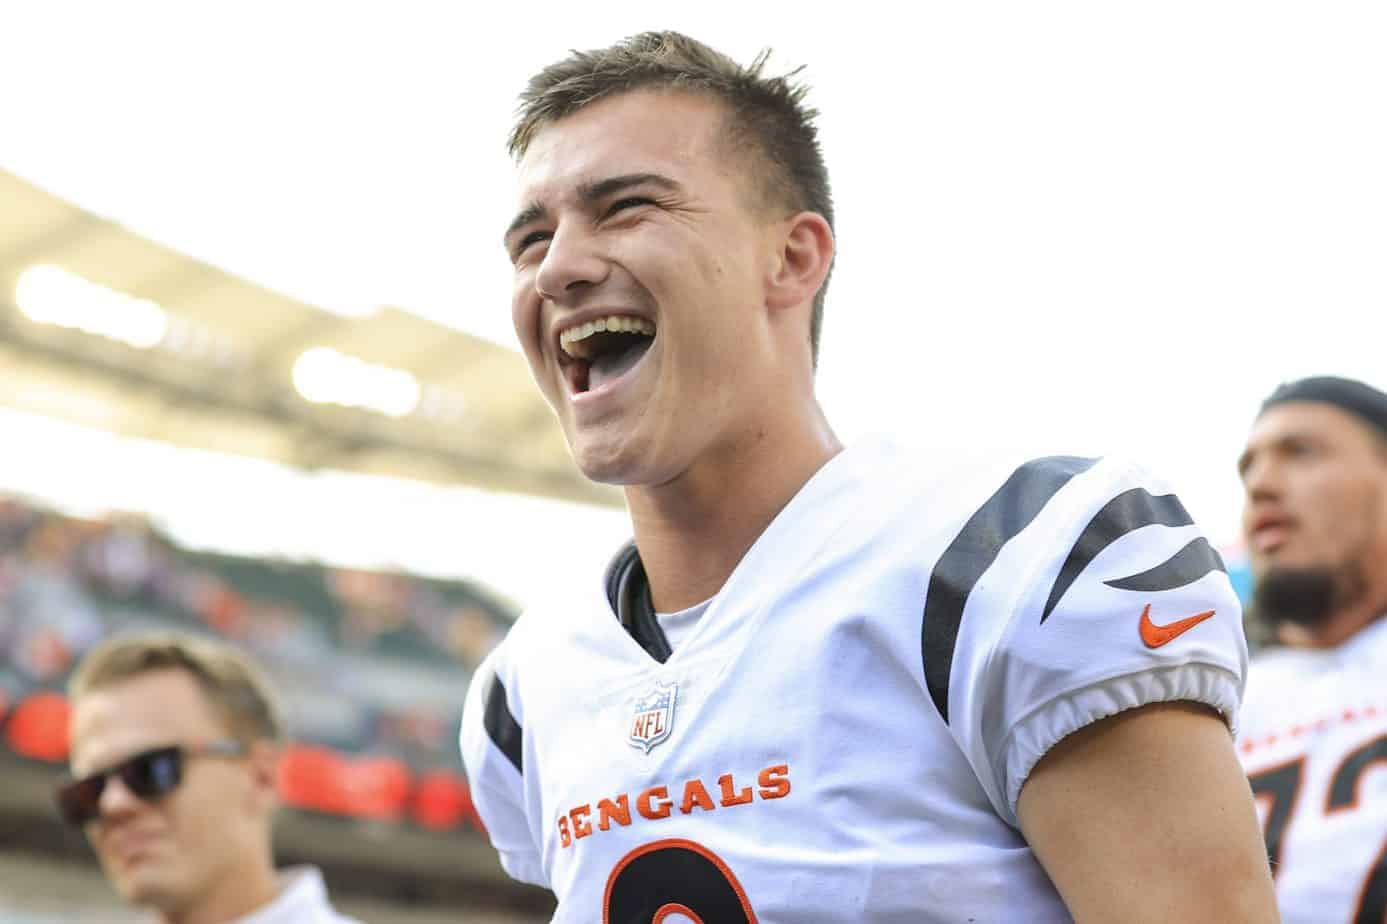 With Bengals kicker Evan McPherson establishing himself as an x-factor for the team, many are wondering about his longtime girlfriend and fiancee, Gracie Groat